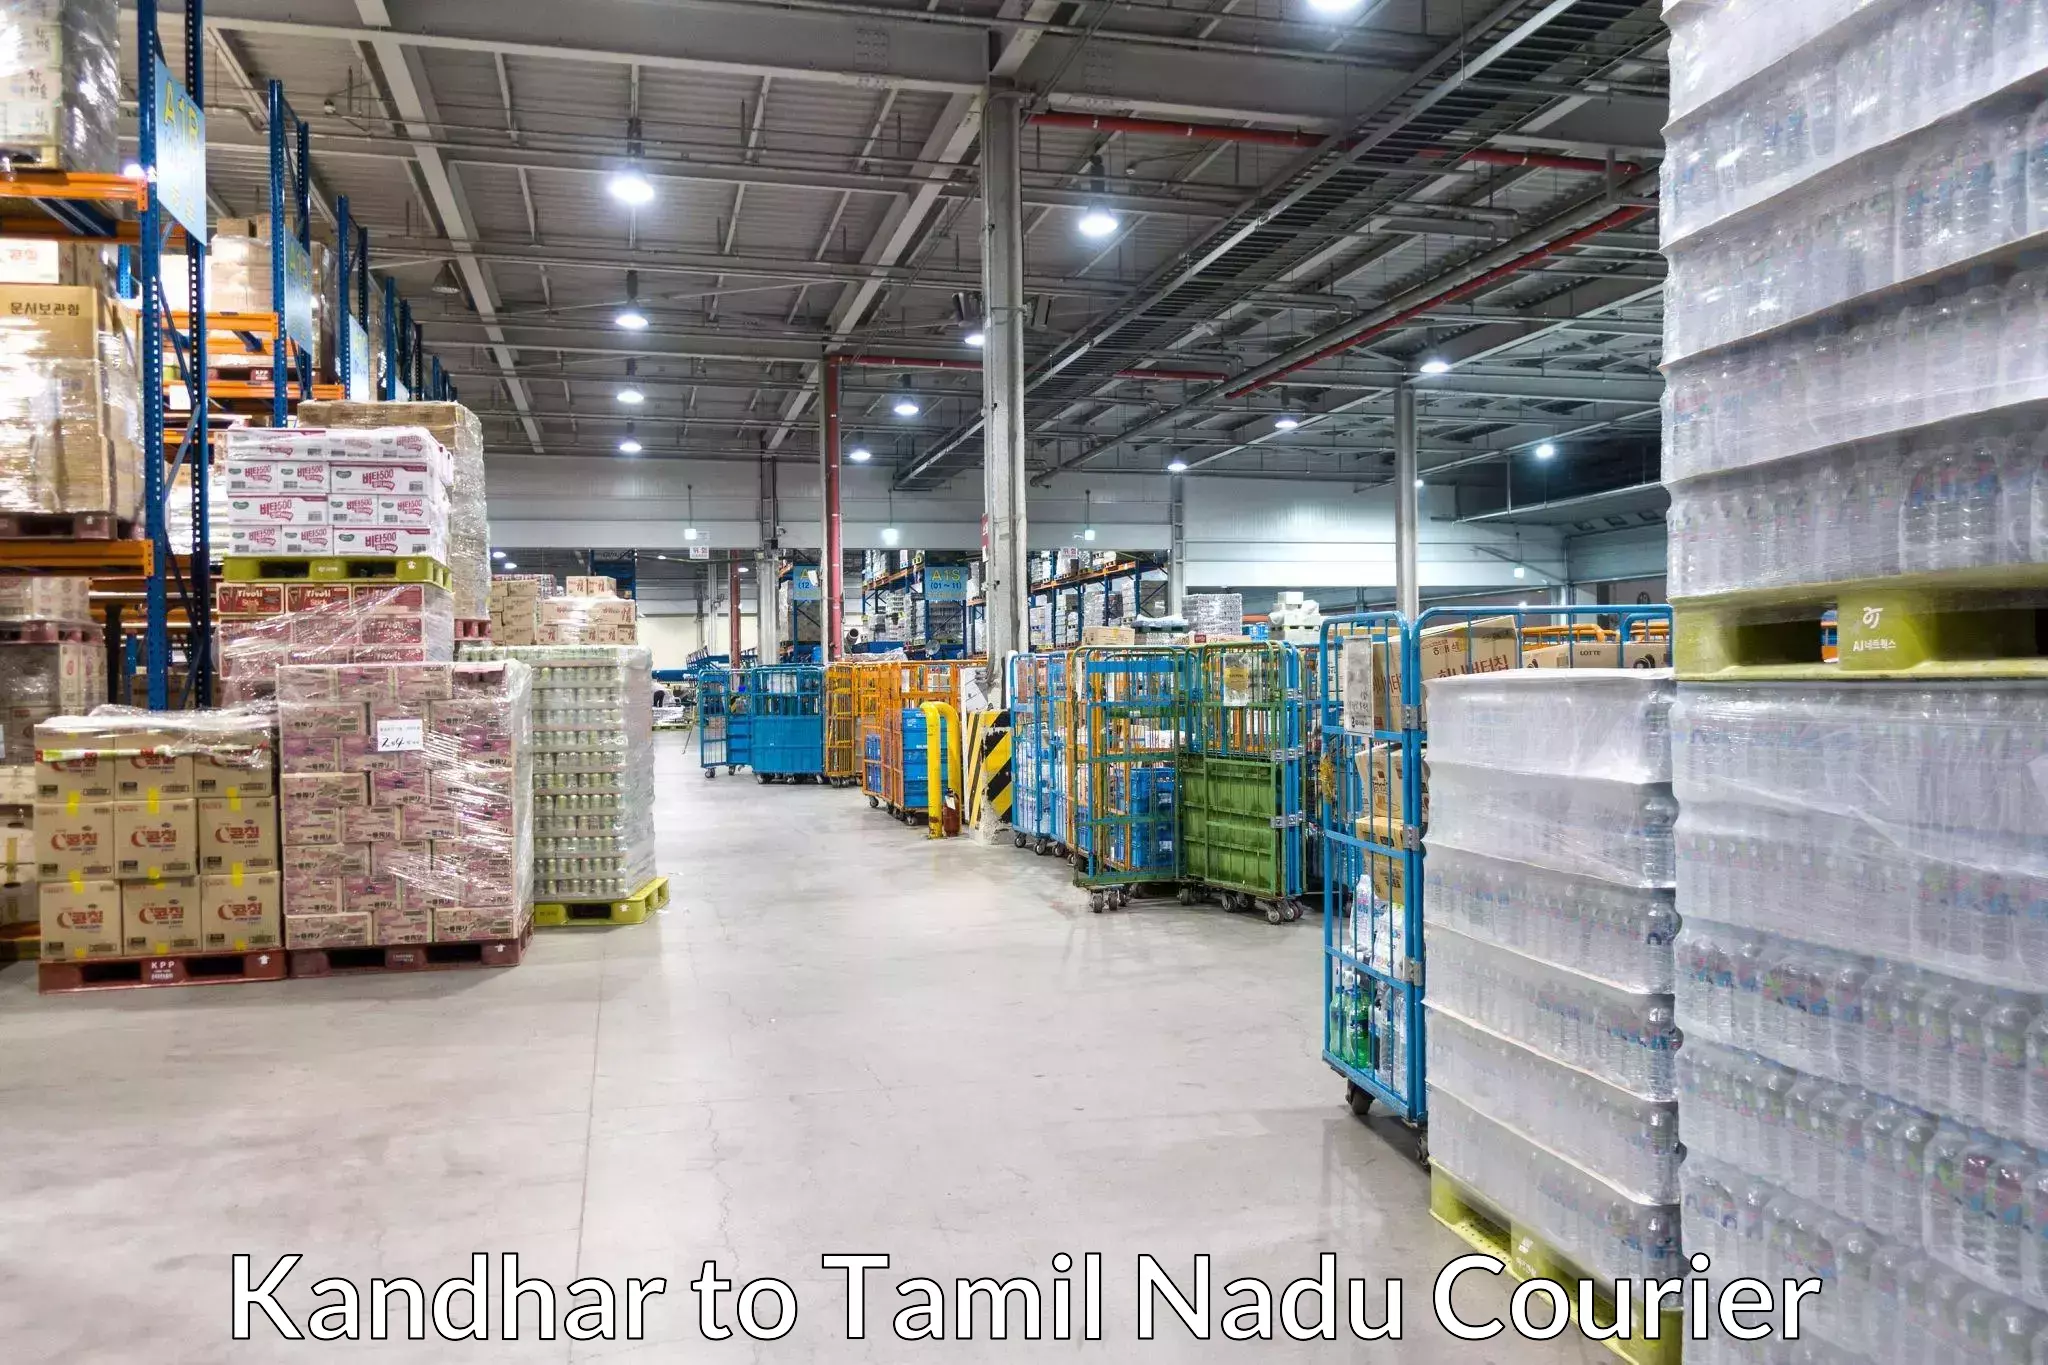 Small business couriers Kandhar to Tamil Nadu